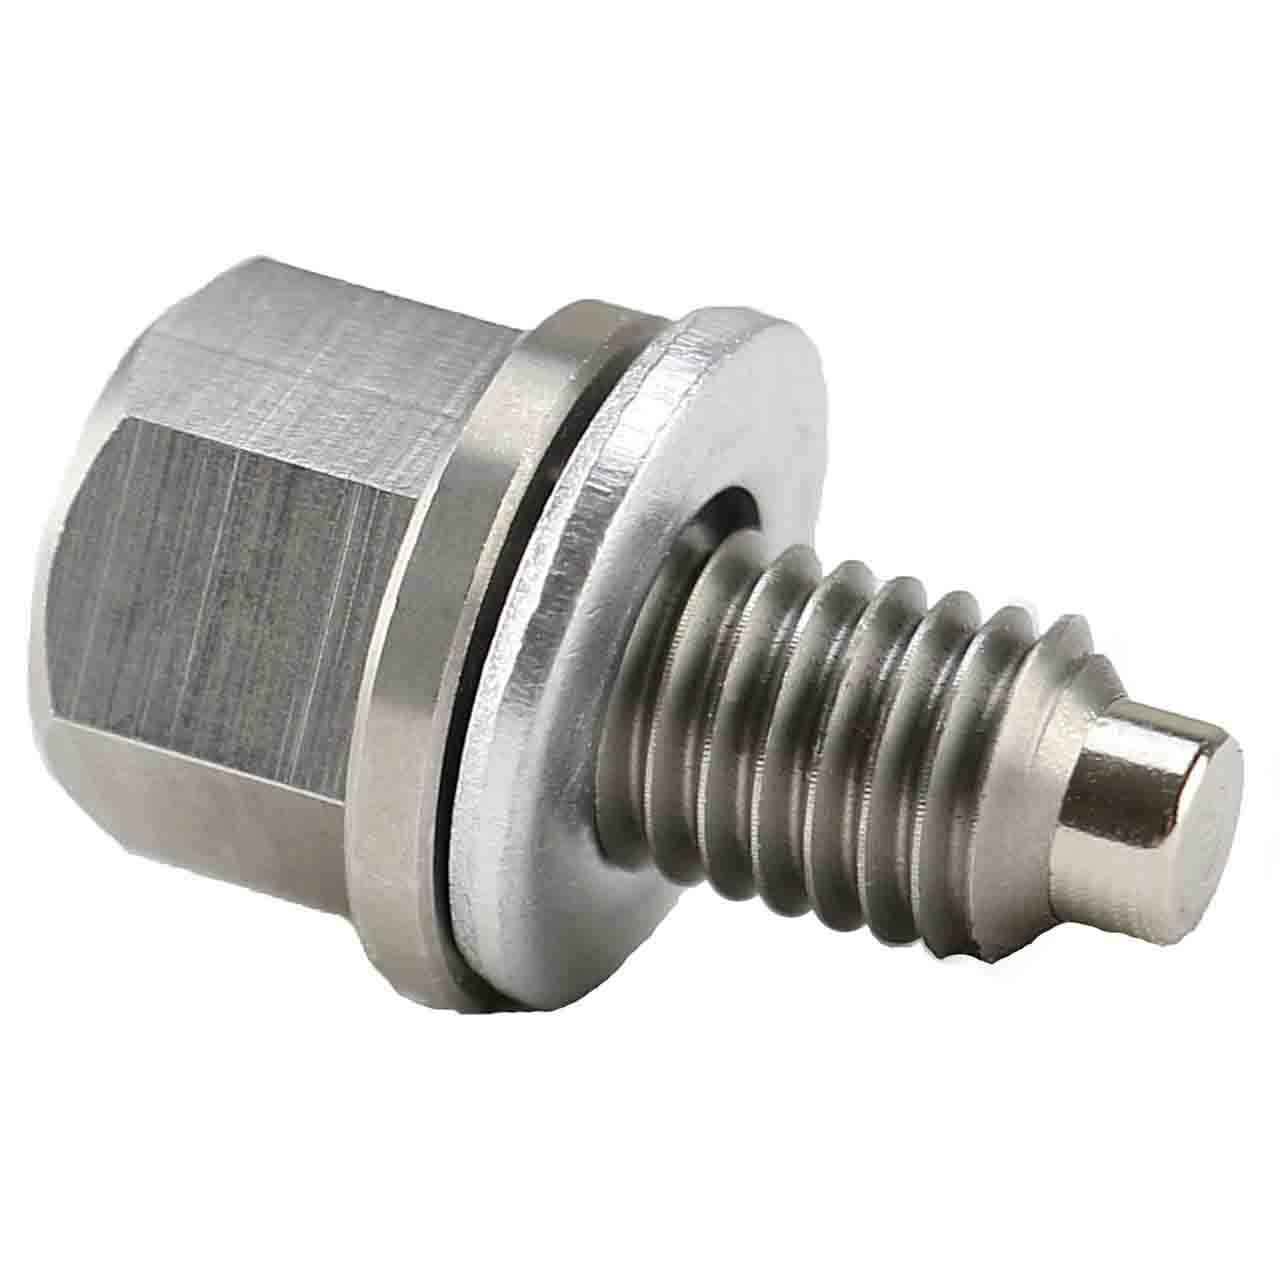 130AA0816 for Kawasaki - Stainless Steel Magnetic Oil Drain Plug with Neodymium Magnet - Made In USA